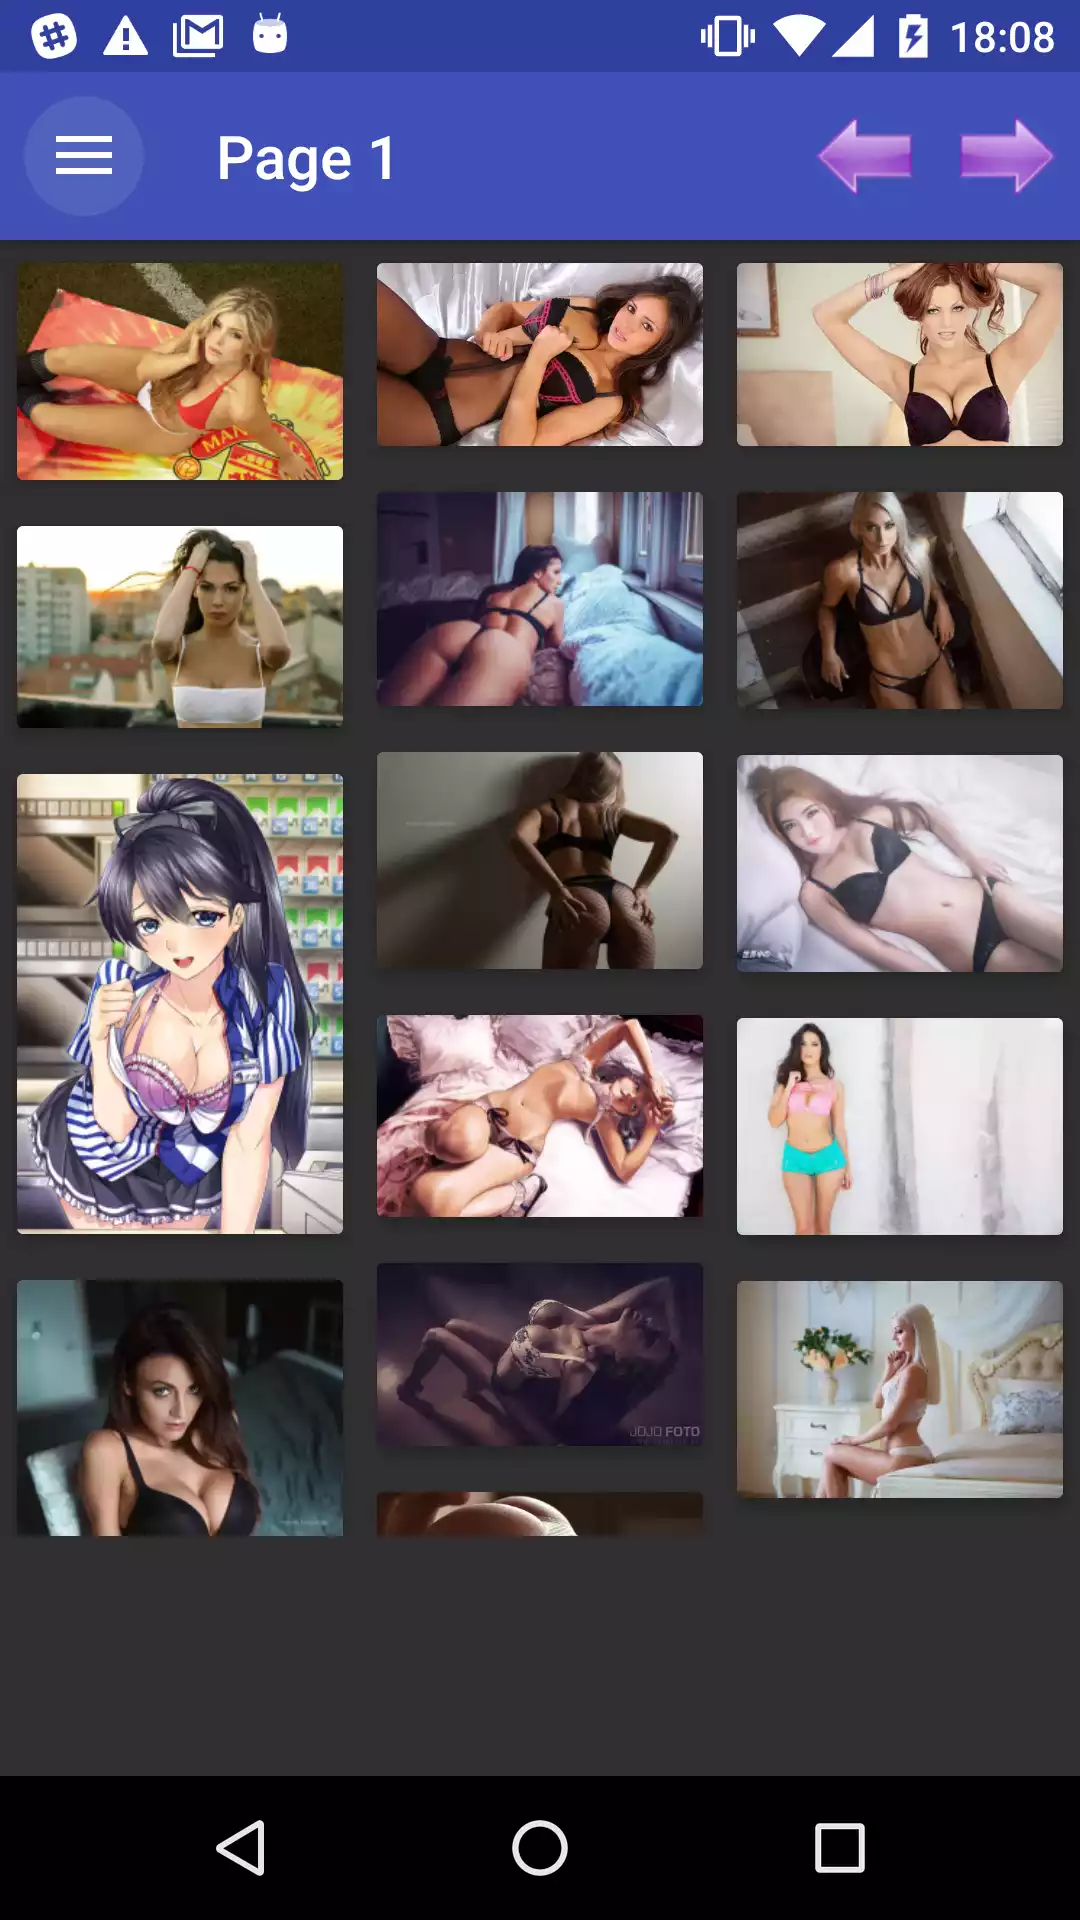 Bra Wallpapers mod,new,apps,manga,offline,panties,hentai,puzzles,hantai,picture,wallpapers,backgrounds,adult,photos,app,sissy,android,porn,sexy,apk